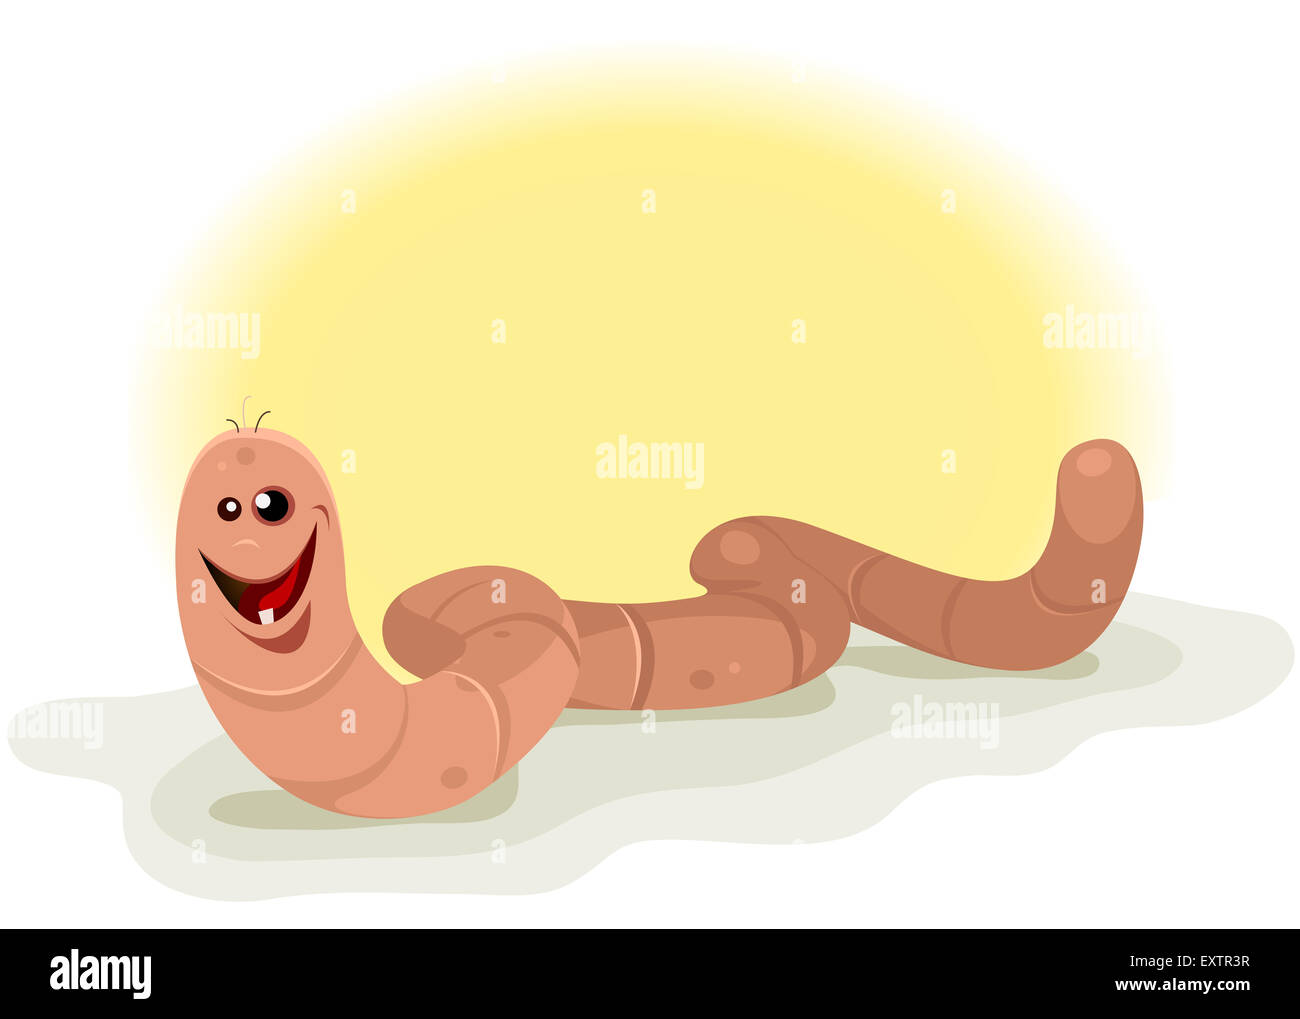 Illustration of a funny cartoon earth worm character smiling and crawling Stock Photo